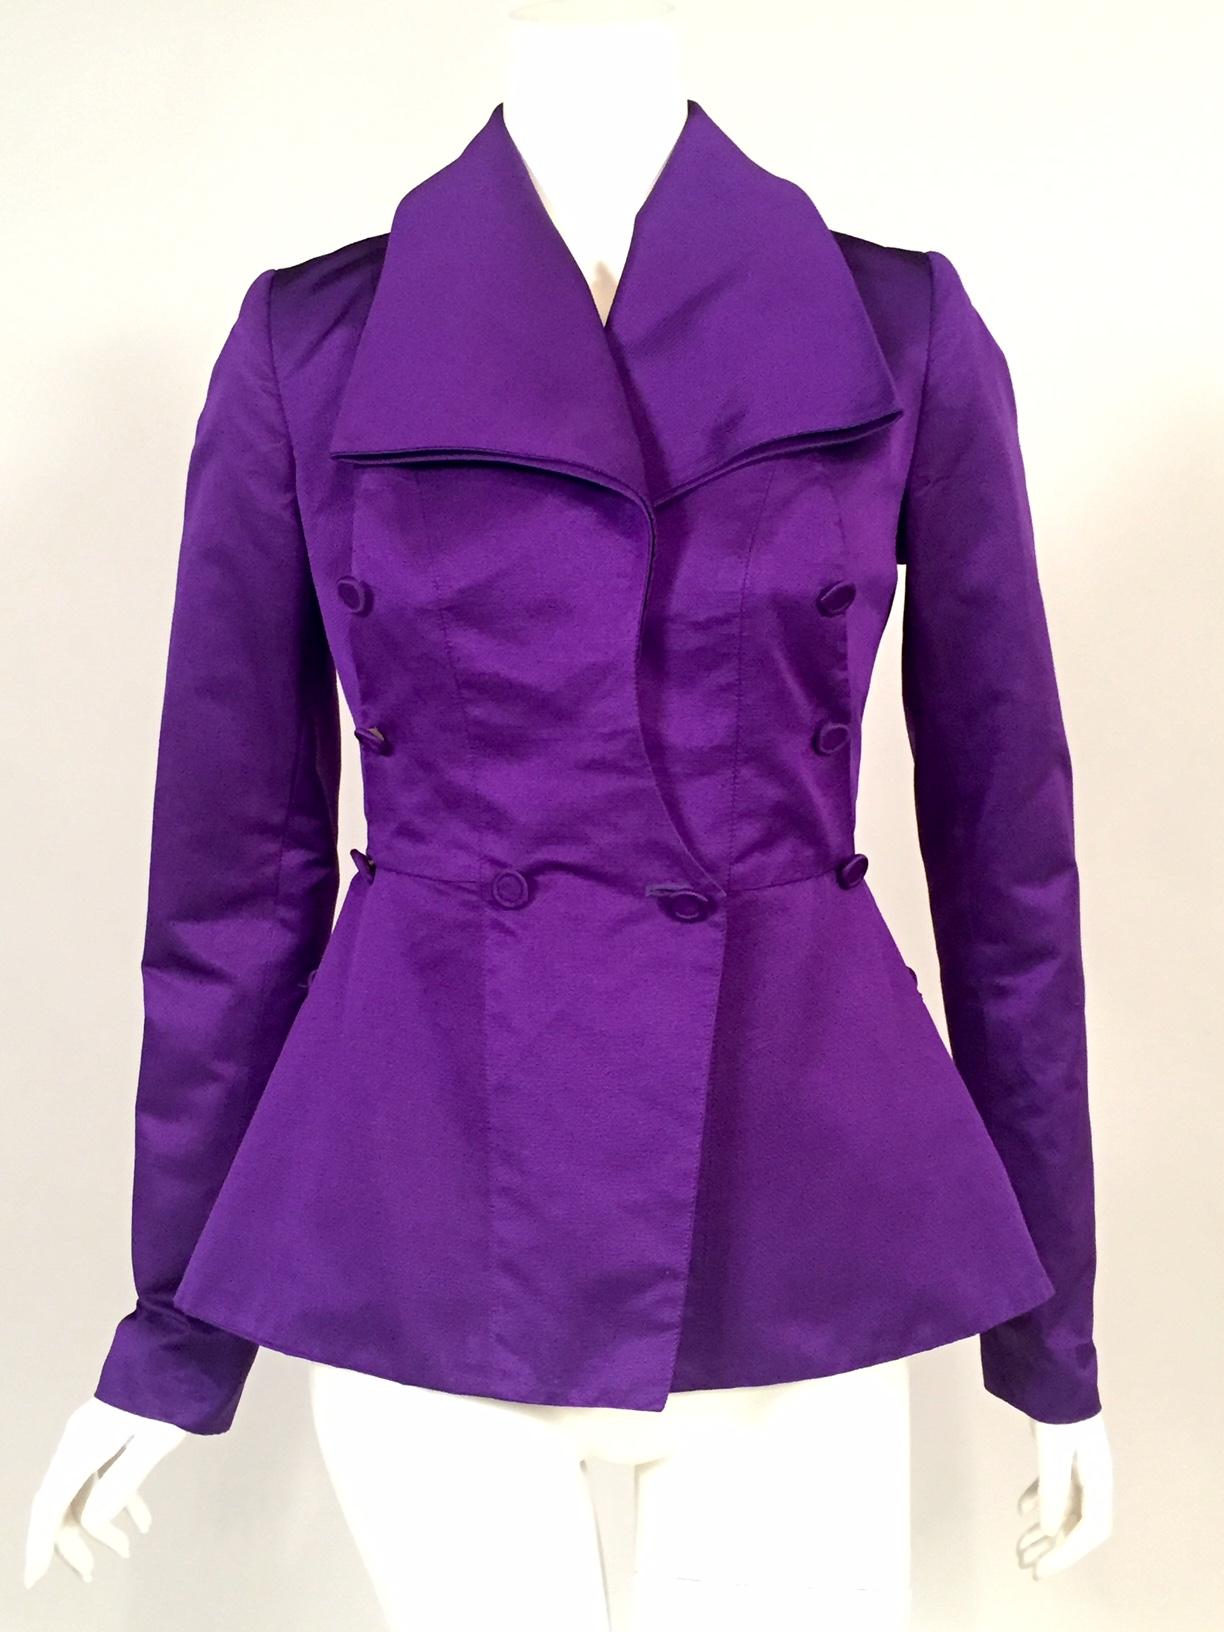 Women's Royal Purple Edwardian Style Silk Faille Jacket by Maggie Norris Couture  For Sale